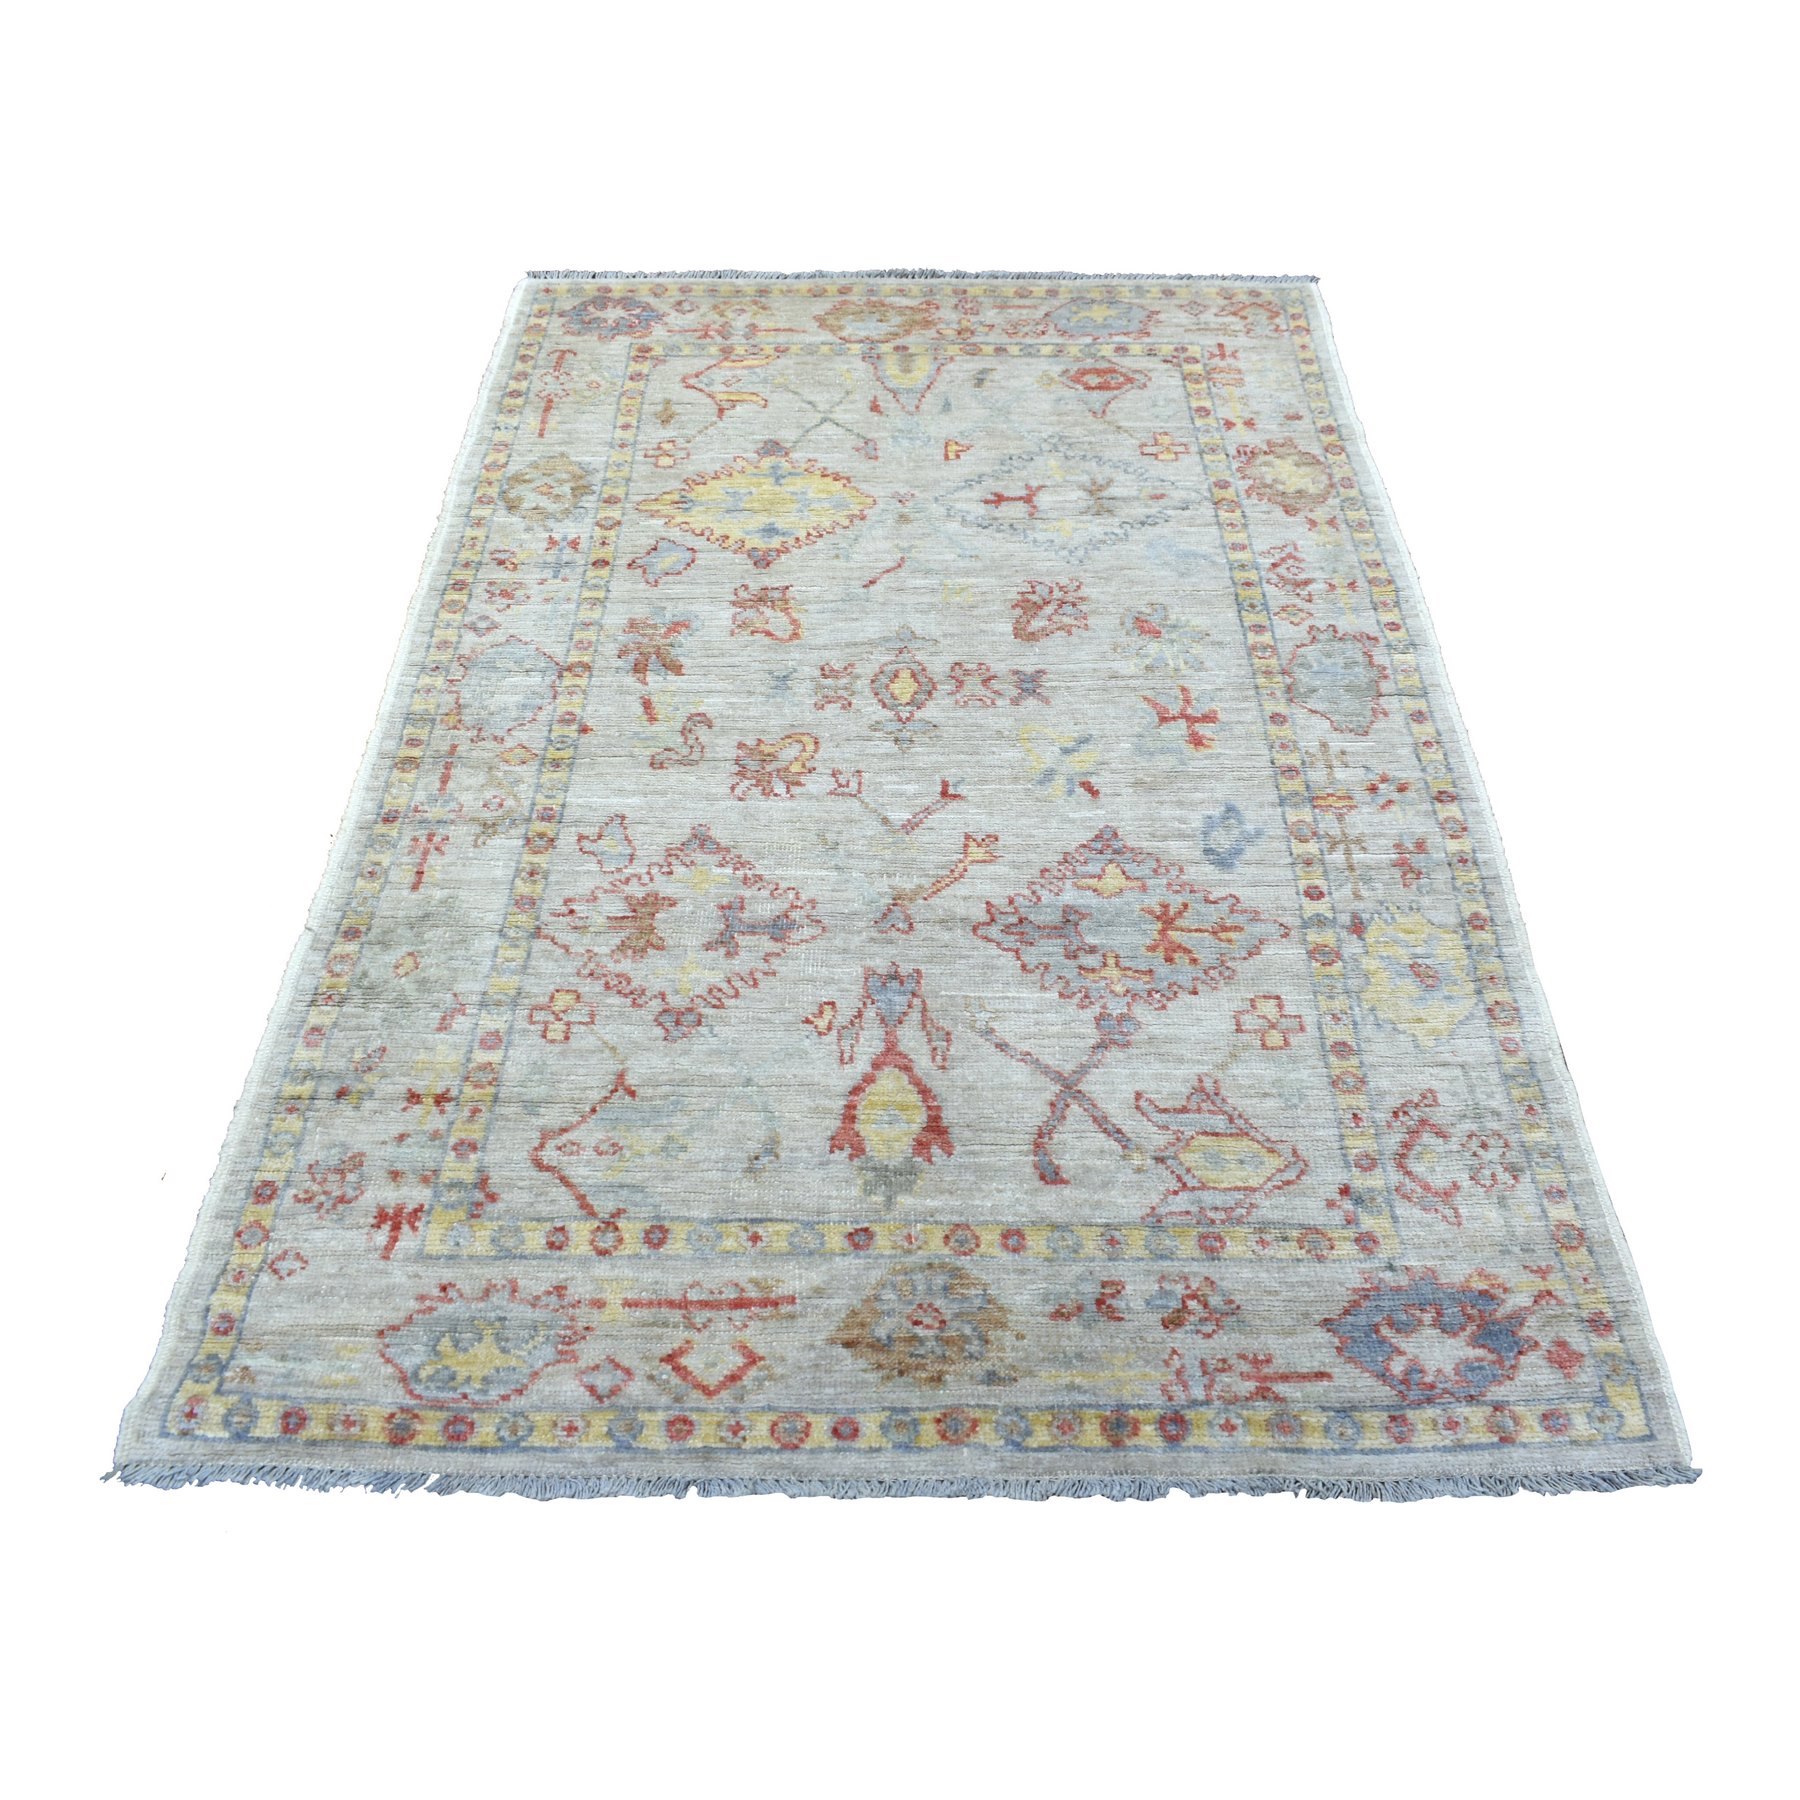 4'x6'2" Gray Angora Oushak with Fresh Style and Plush Comfort Natural Wool Hand Woven Oriental Rug 